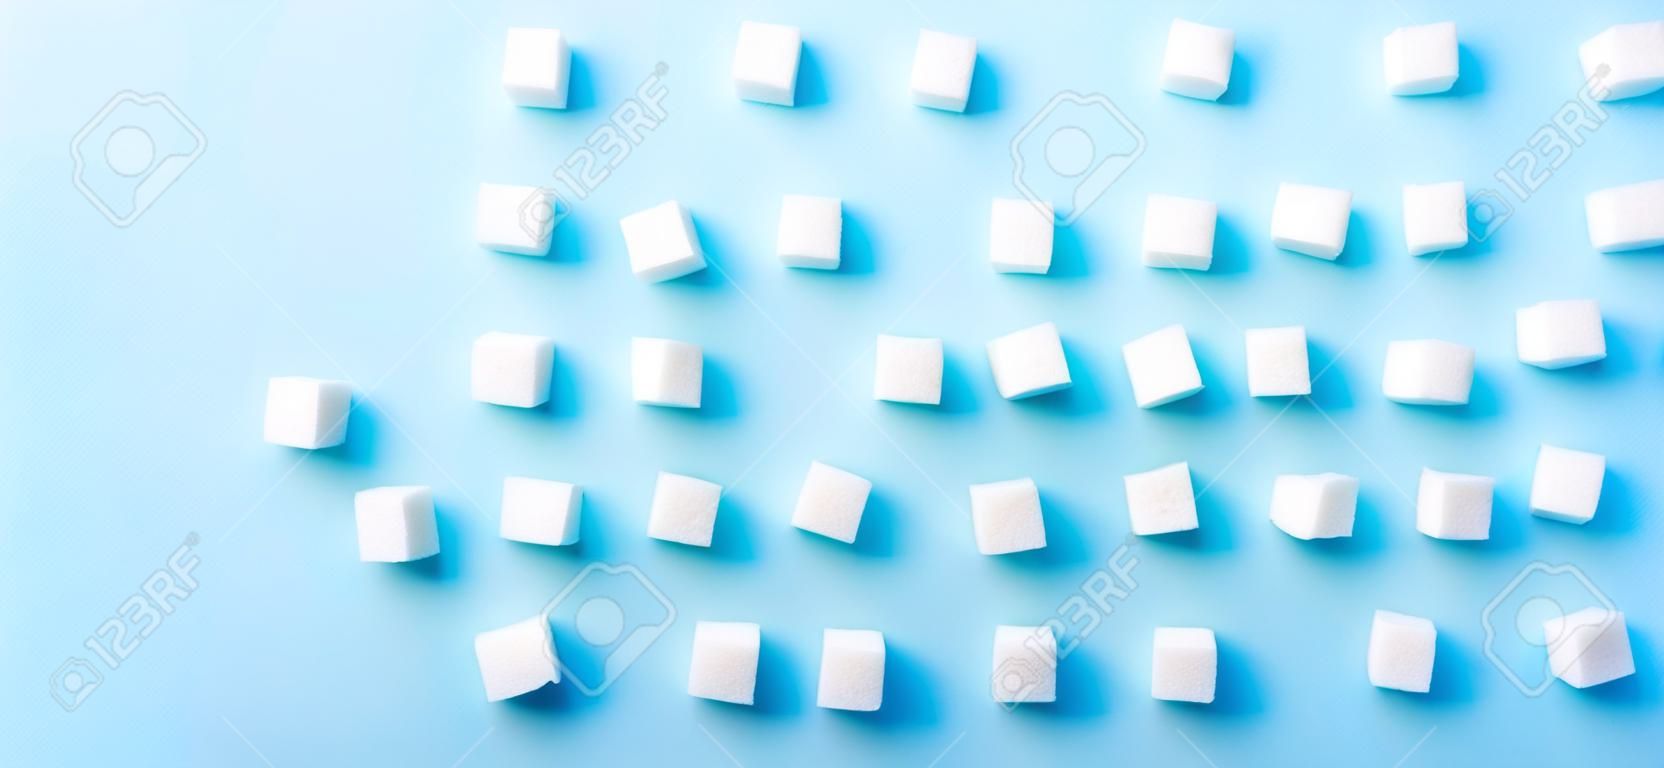 Sugar cubes regular pattern on blue background, flat lay banner with copy space